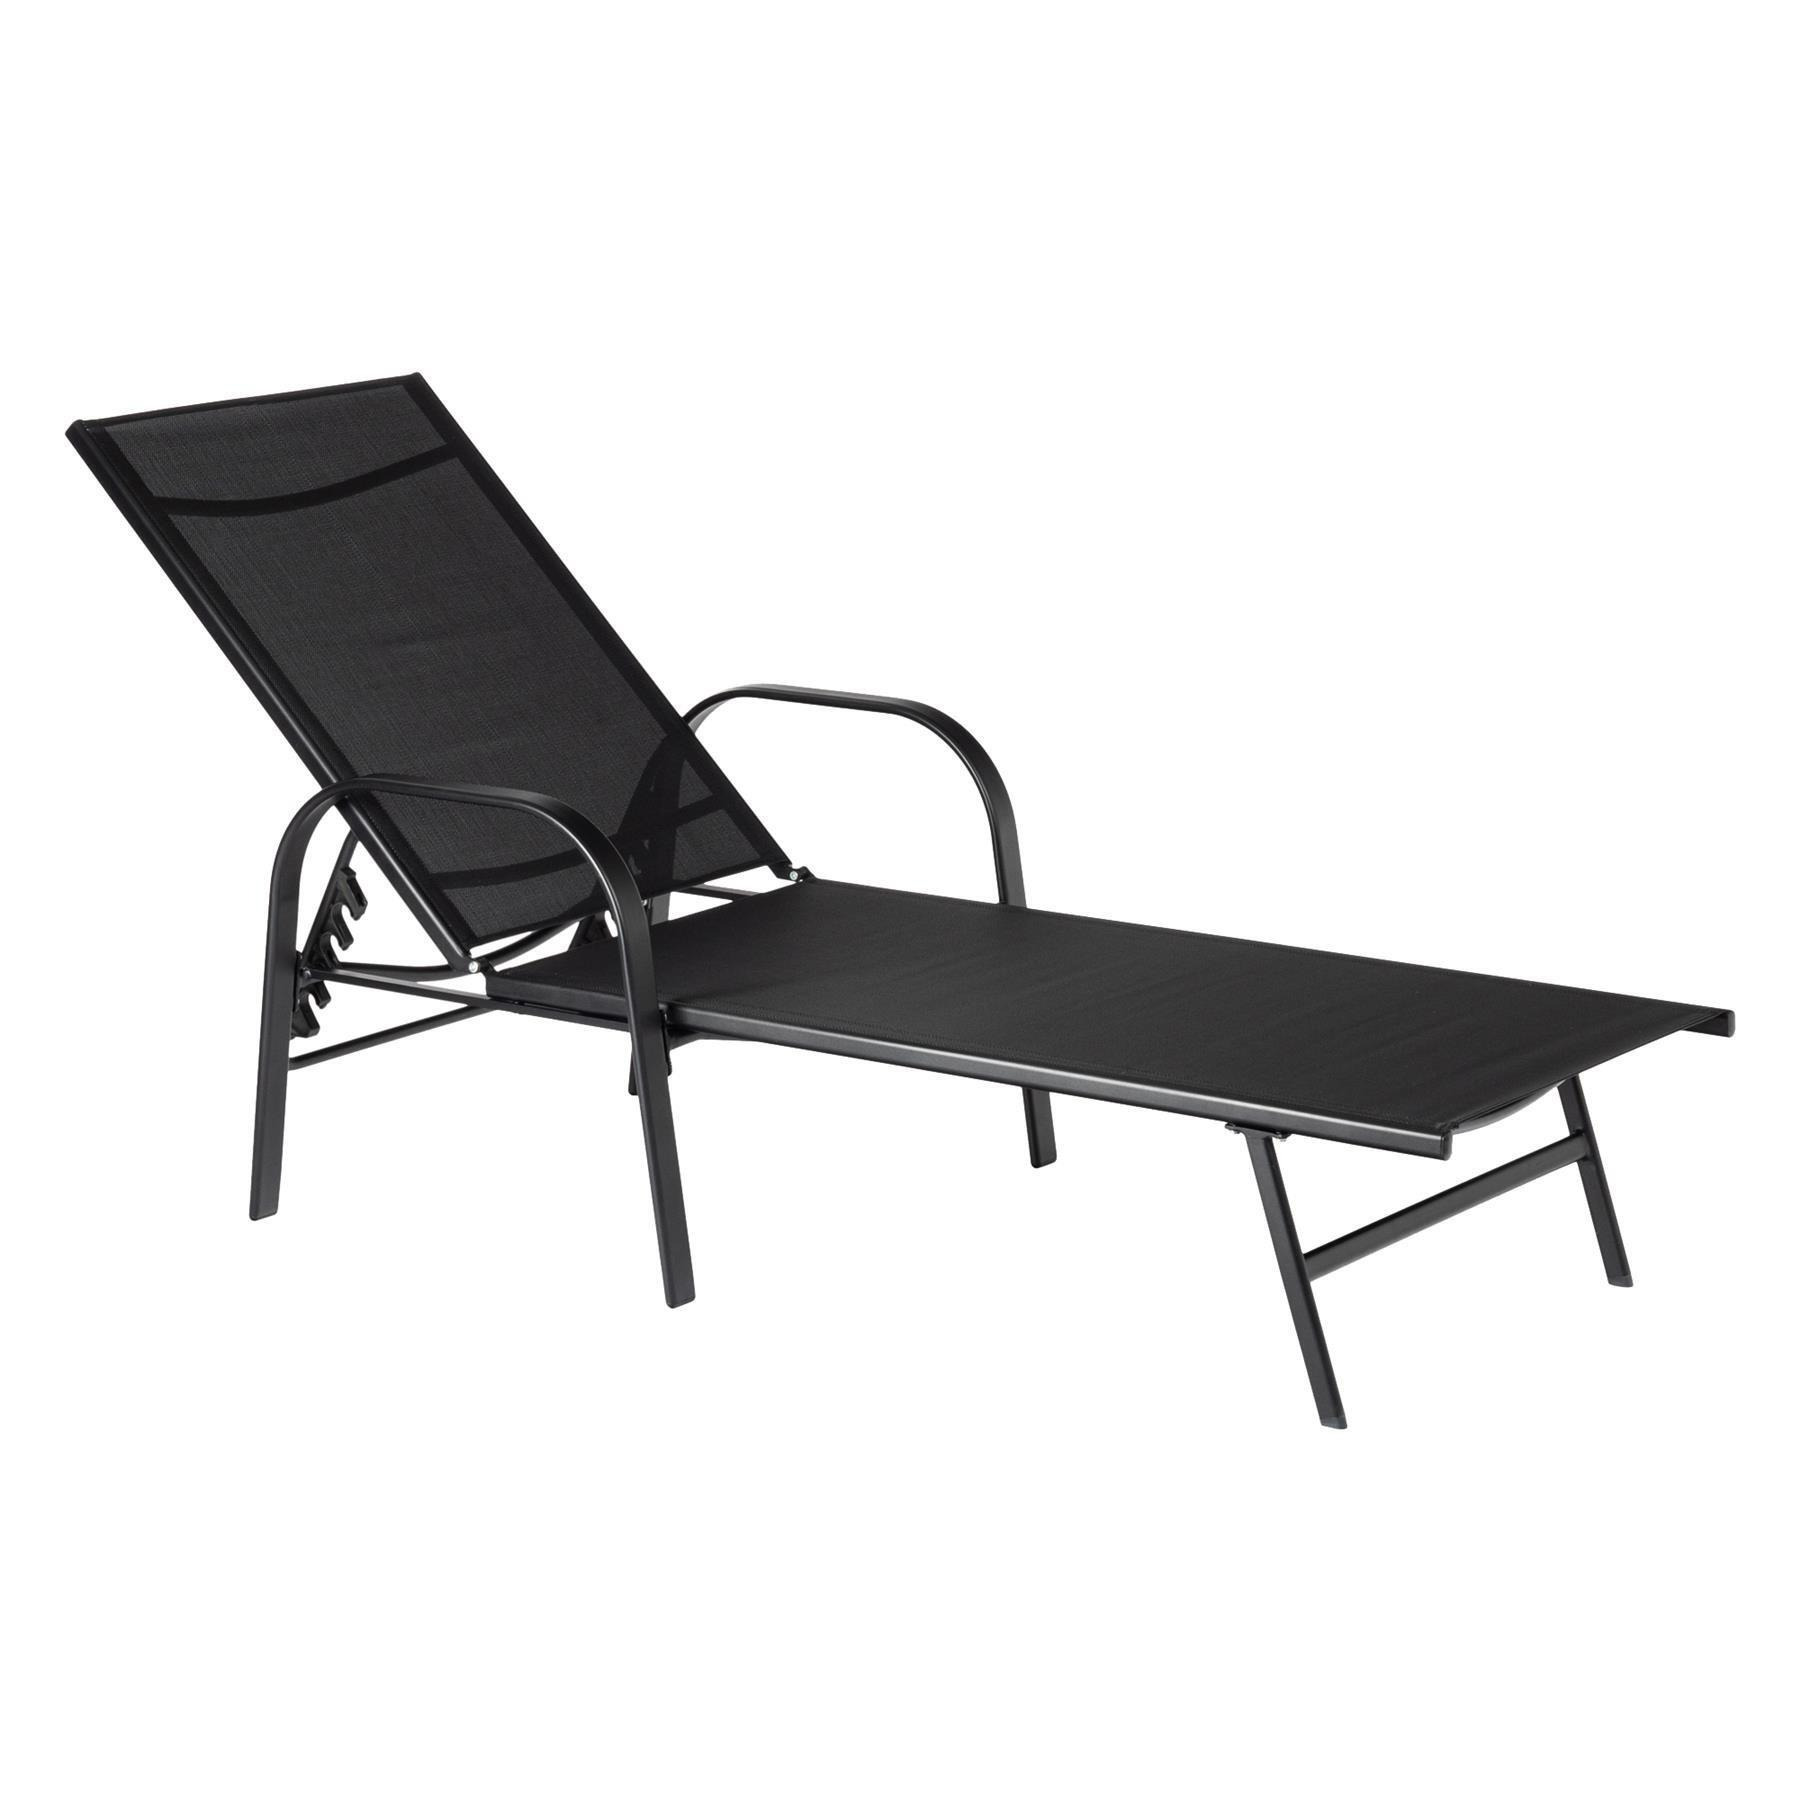 Sussex Garden Sun Lounger Bed - image 1